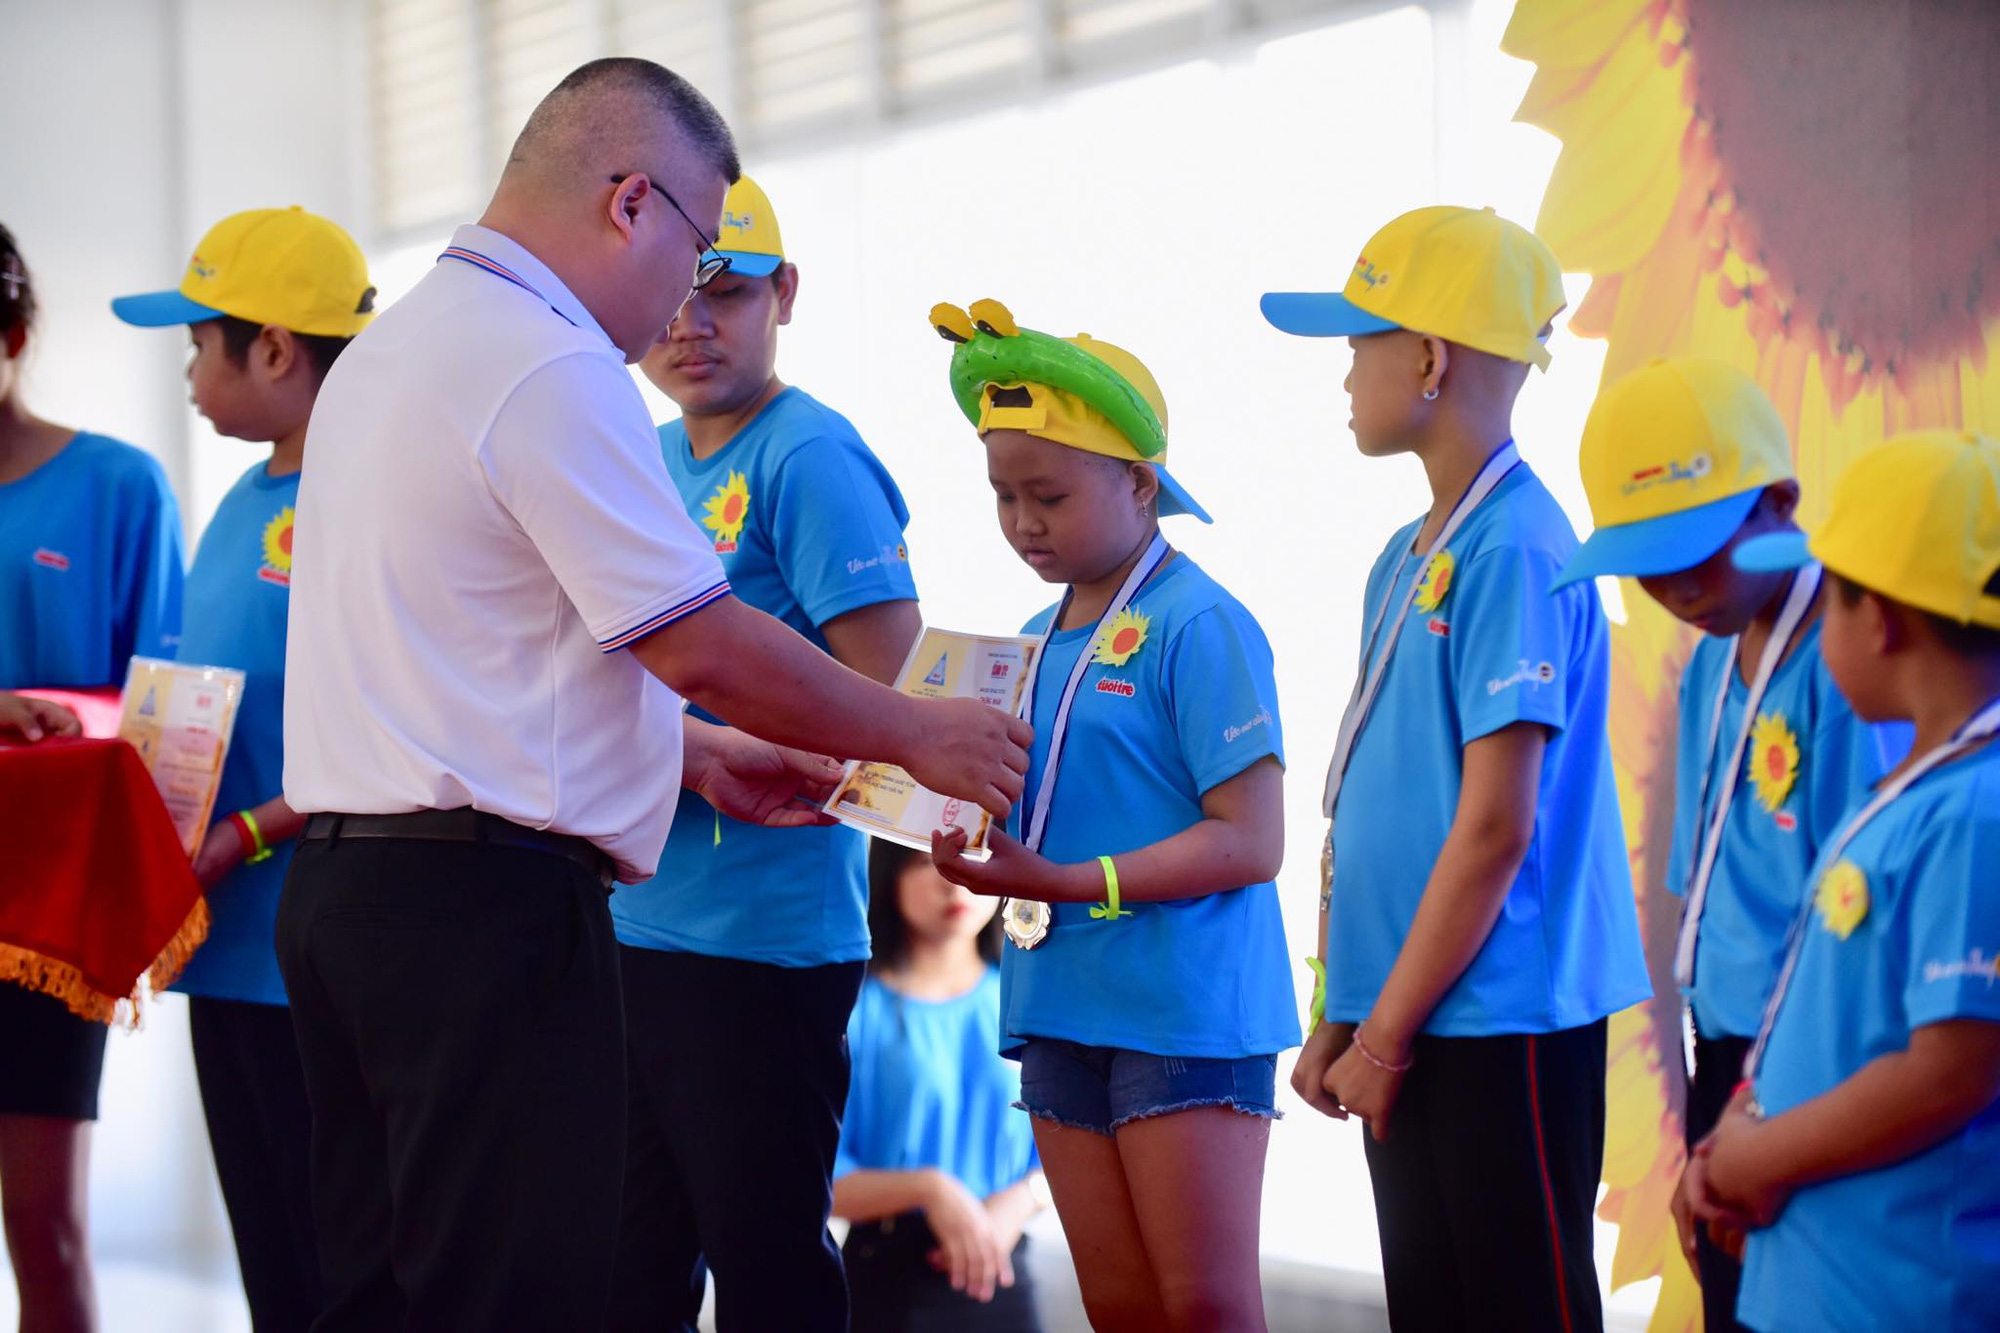 Scholarships are given to cancer-stricken children who are healthy enough to attend school. Photo: Duyen Phan / Tuoi Tre